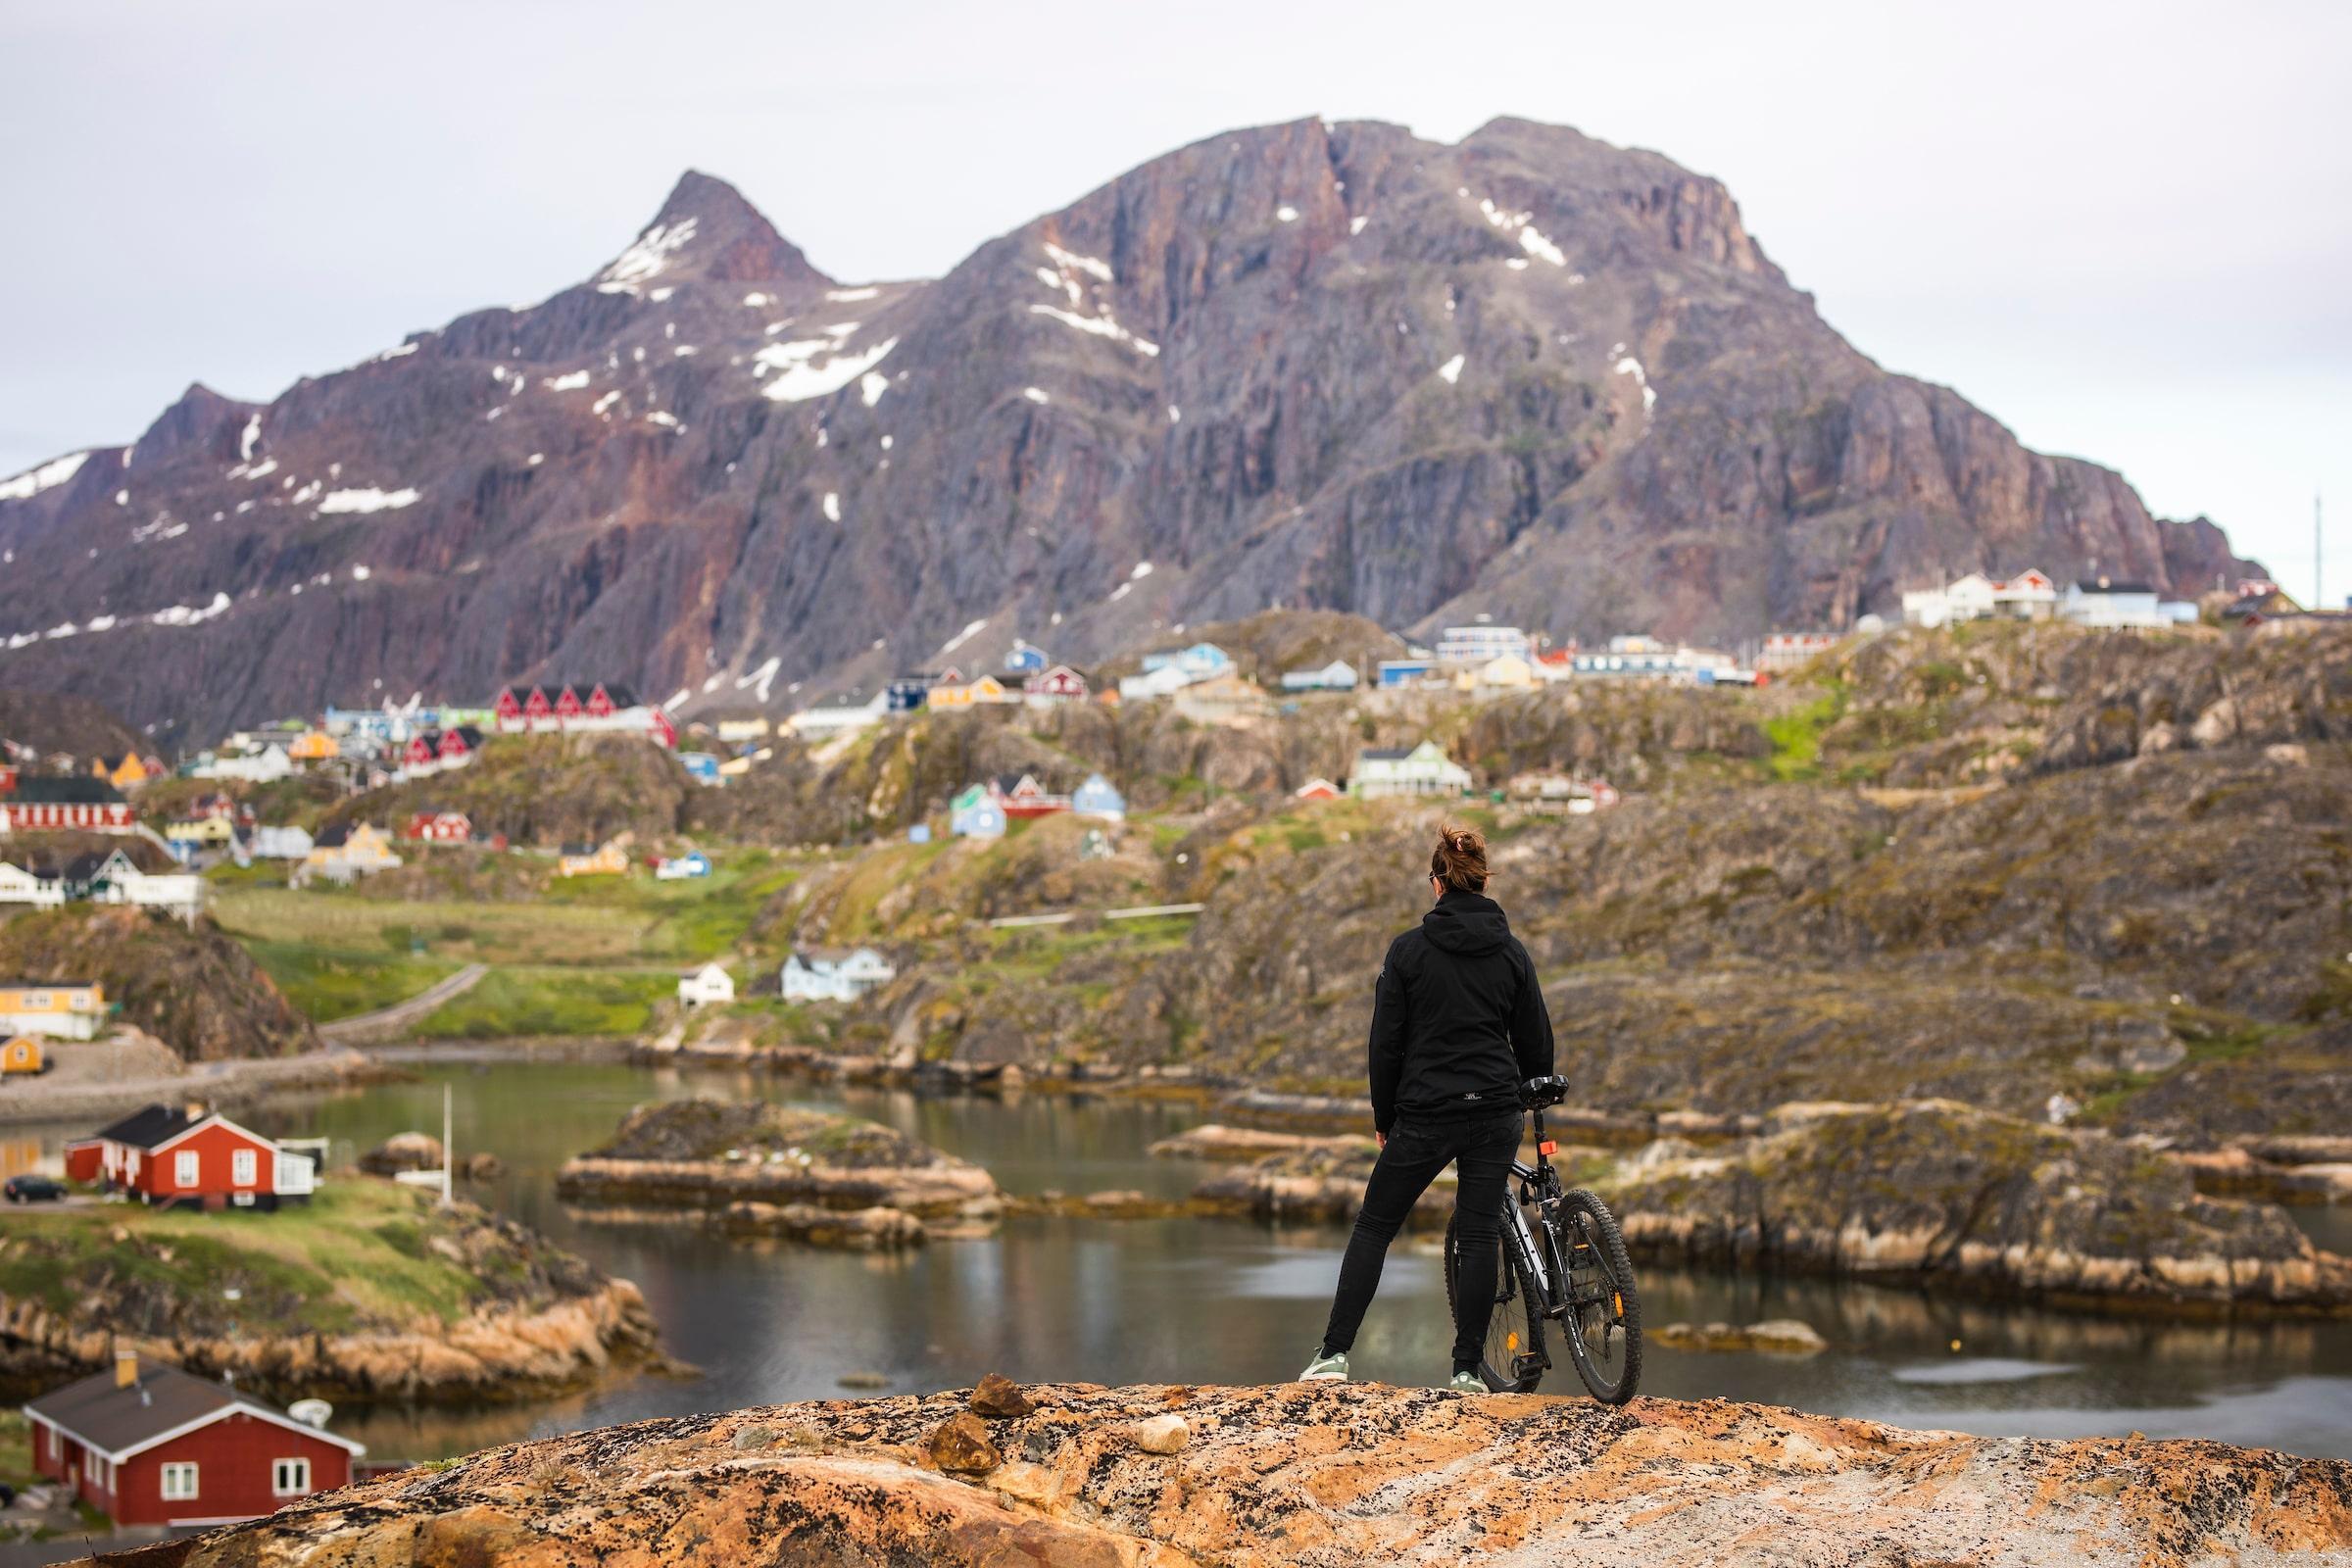 Cyclists on a mountain in Sisimiut. Photo: Aningaaq R. Carlsen